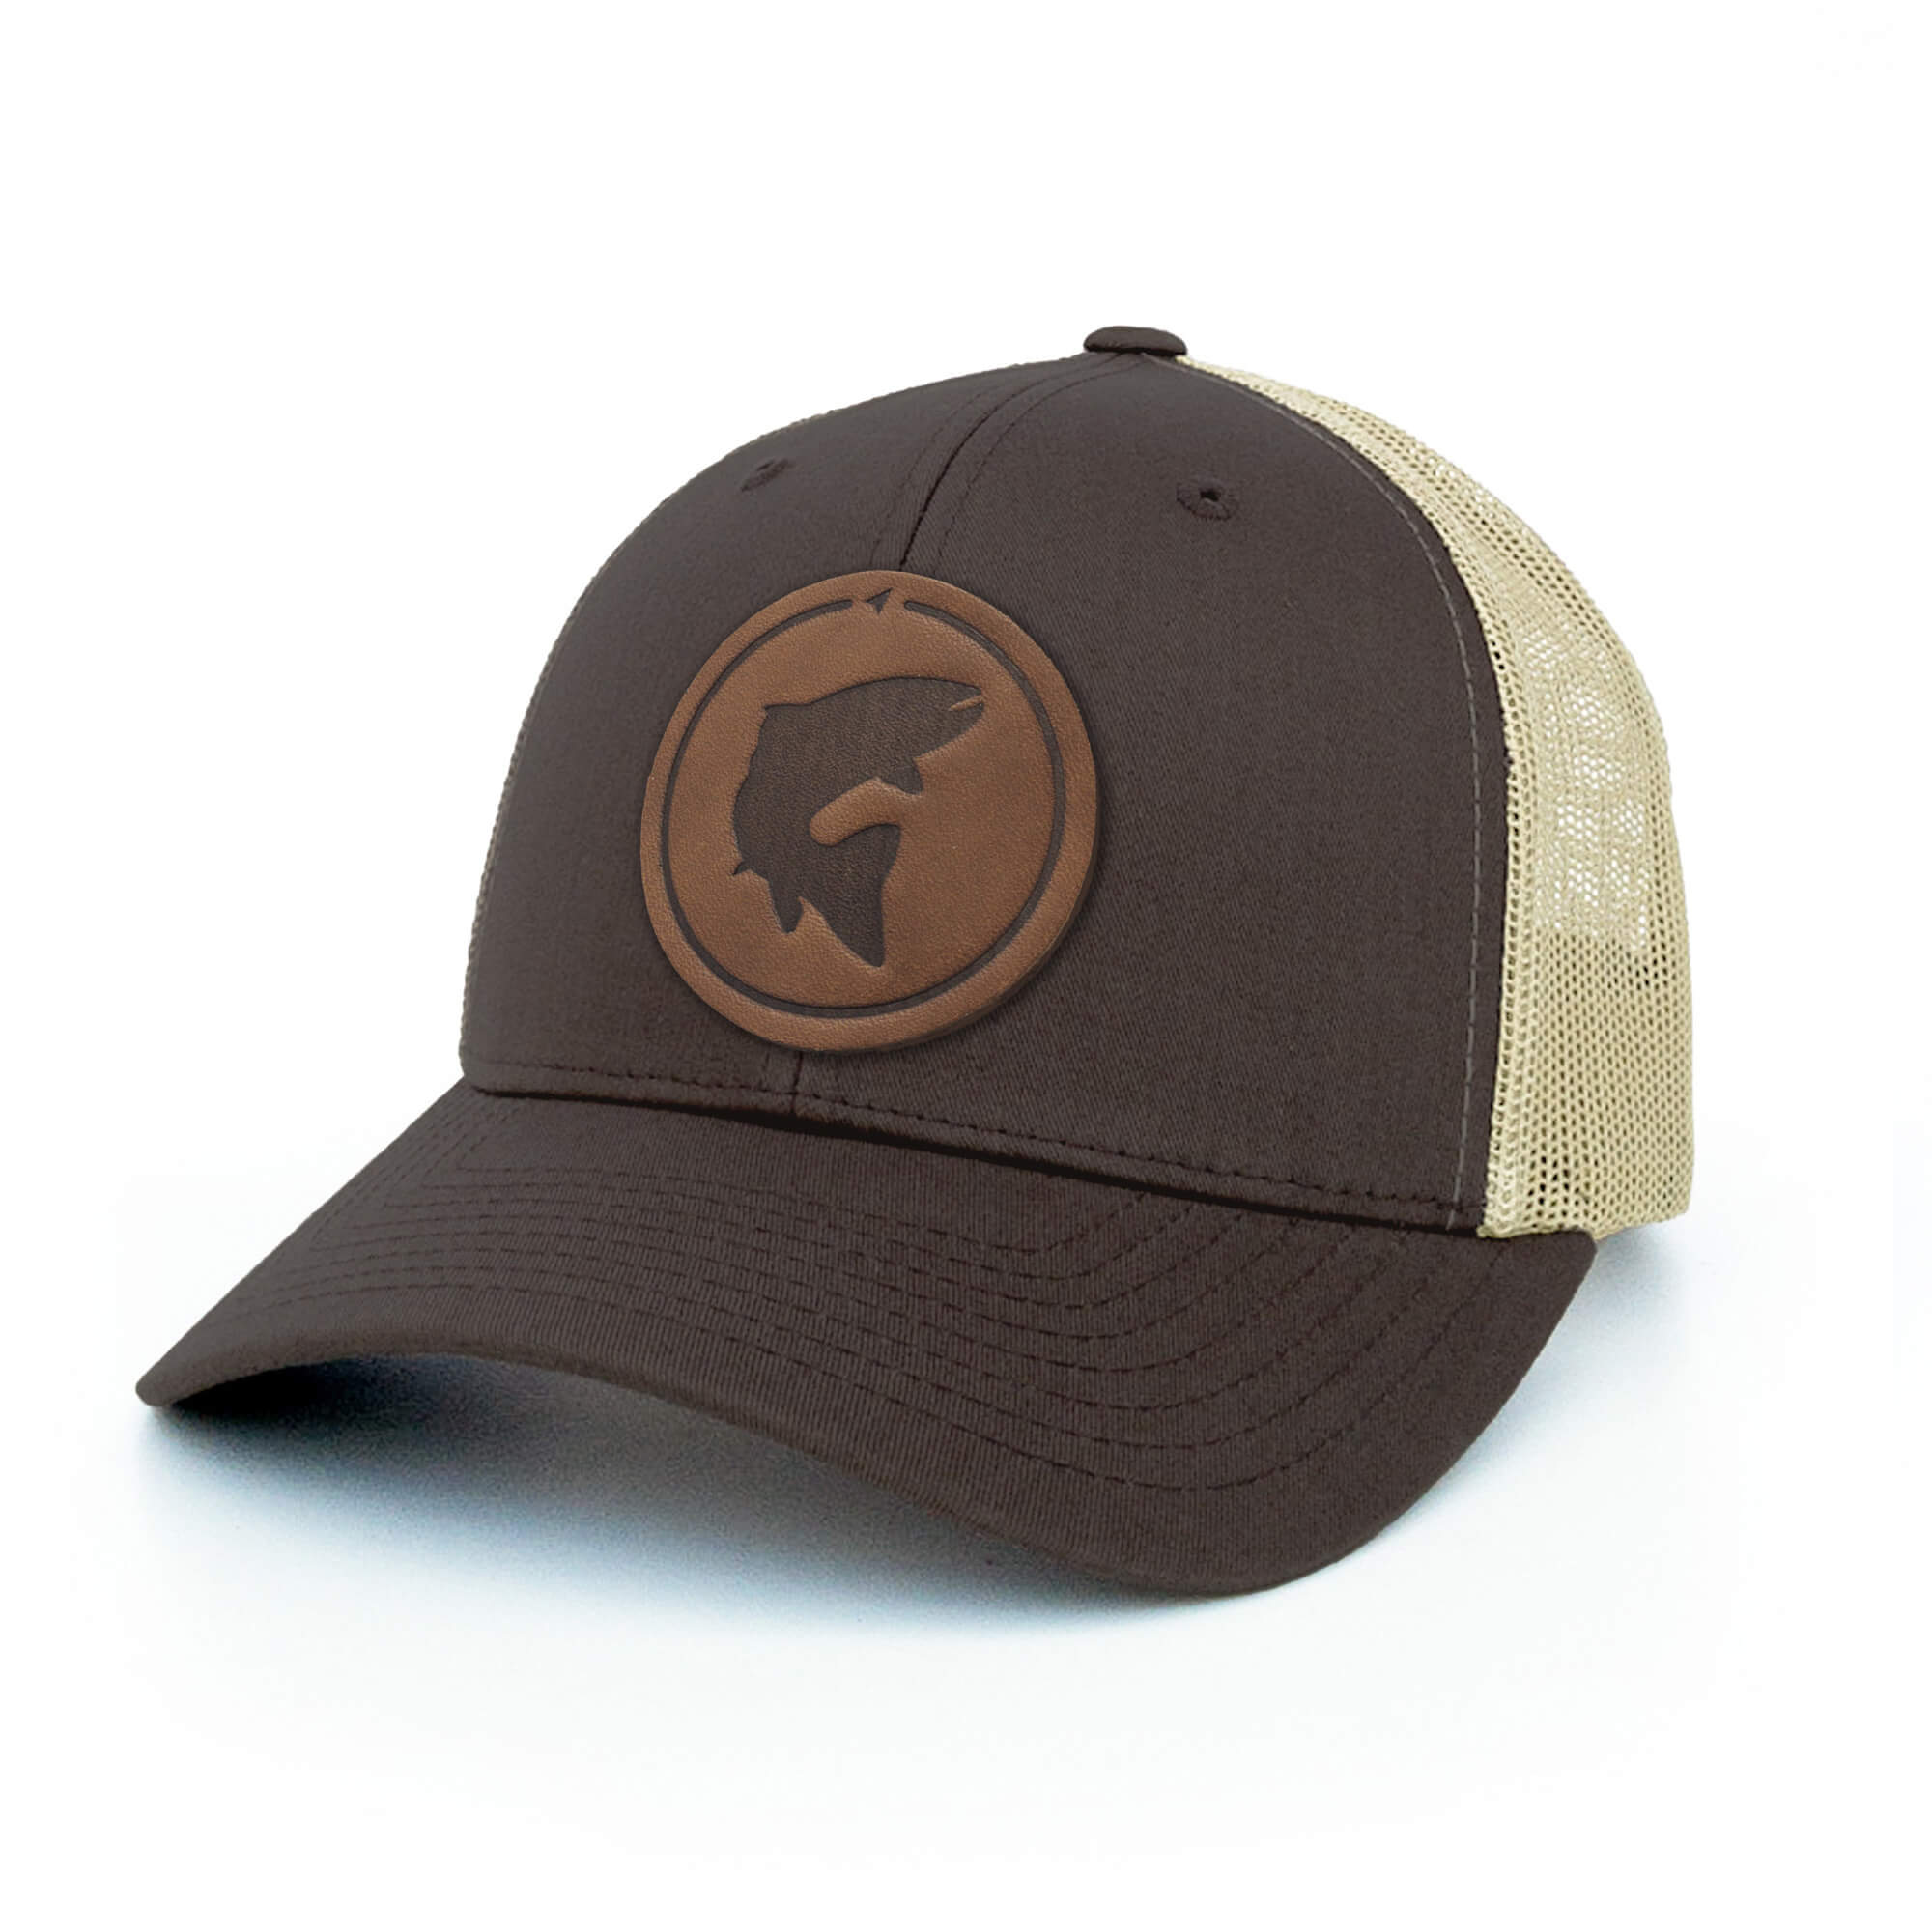 Brown and khaki trucker hat with full-grain leather patch of a Trout | BLACK-004-001, CHARC-004-001, NAVY-004-001, HGREY-004-001, MOSS-004-001, BROWN-004-001